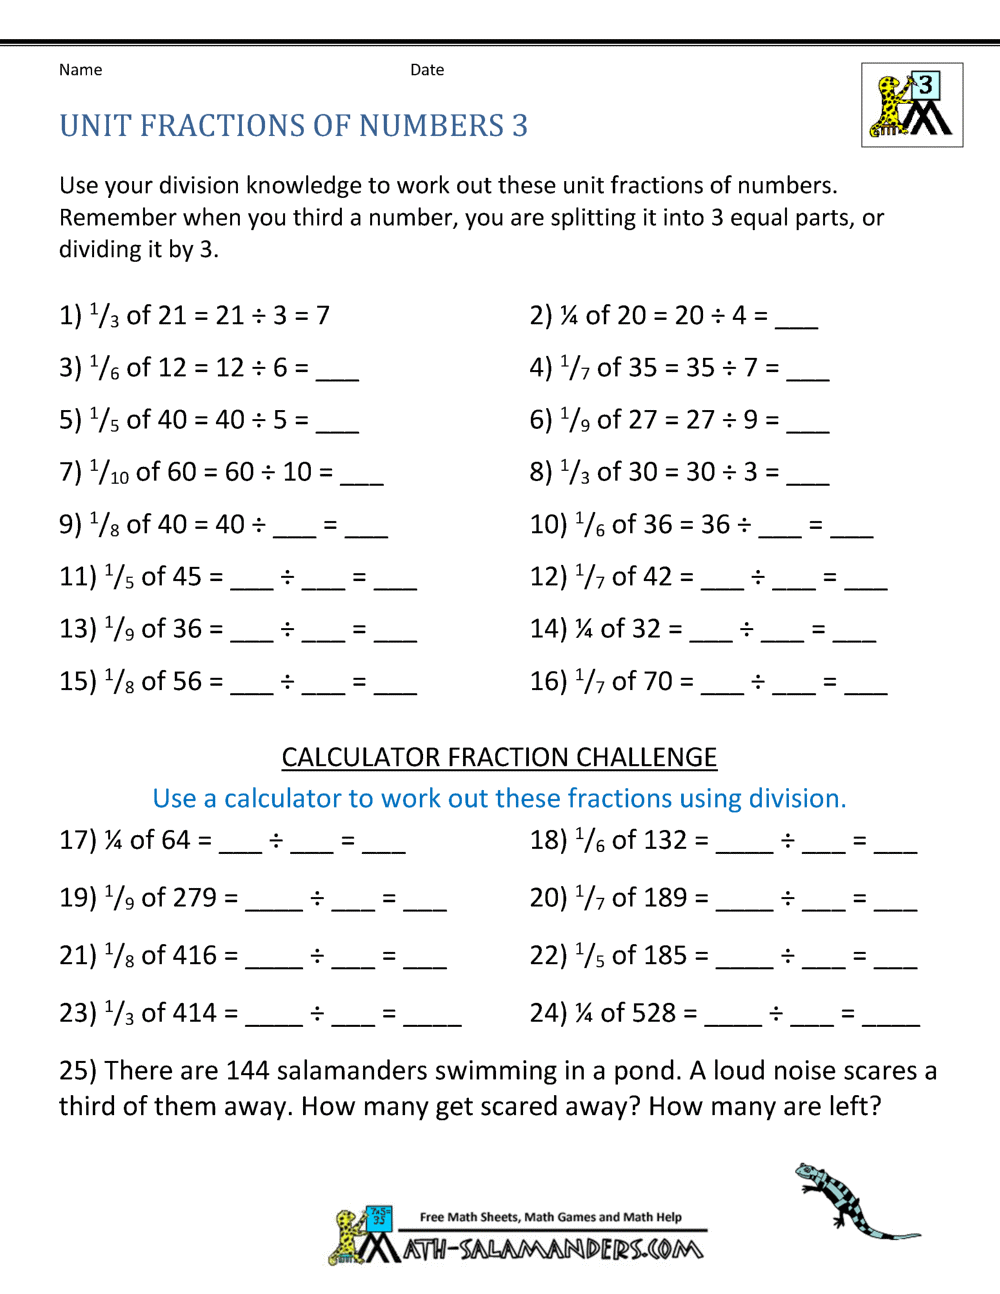 12 FREE MATH WORKSHEETS GRADE 4 COMPARING NUMBERS